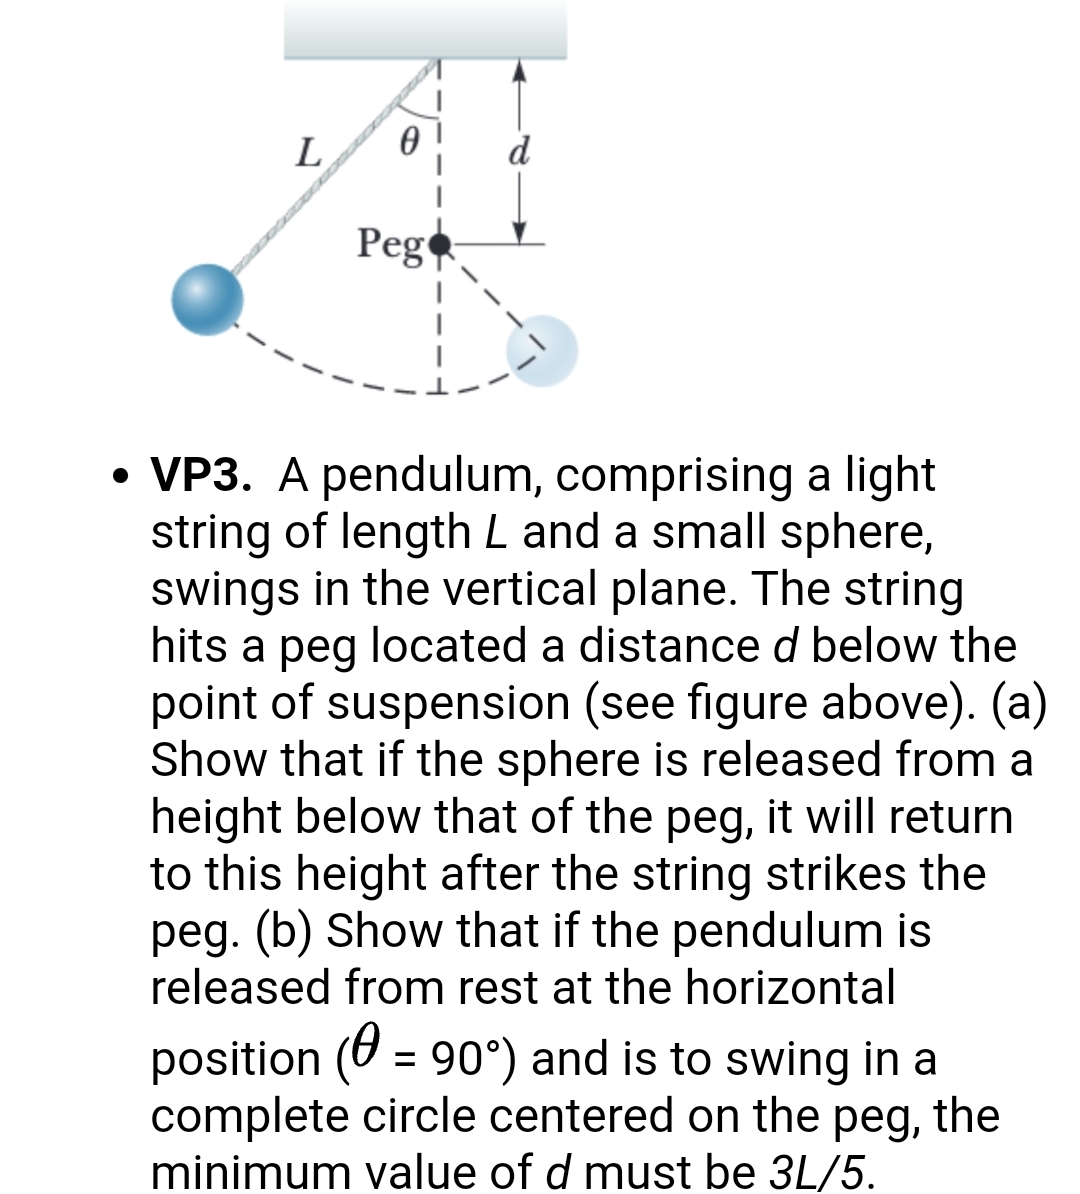 L
Peg
• VP3. A pendulum, comprising a light
string of length L and a small sphere,
swings in the vertical plane. The string
hits a peg located a distance d below the
point of suspension (see figure above). (a)
Show that if the sphere is released from a
height below that of the peg, it will return
to this height after the string strikes the
peg. (b) Show that if the pendulum is
released from rest at the horizontal
position (0 = 90°) and is to swing in a
complete circle centered on the peg, the
minimum value of d must be 3L/5.
